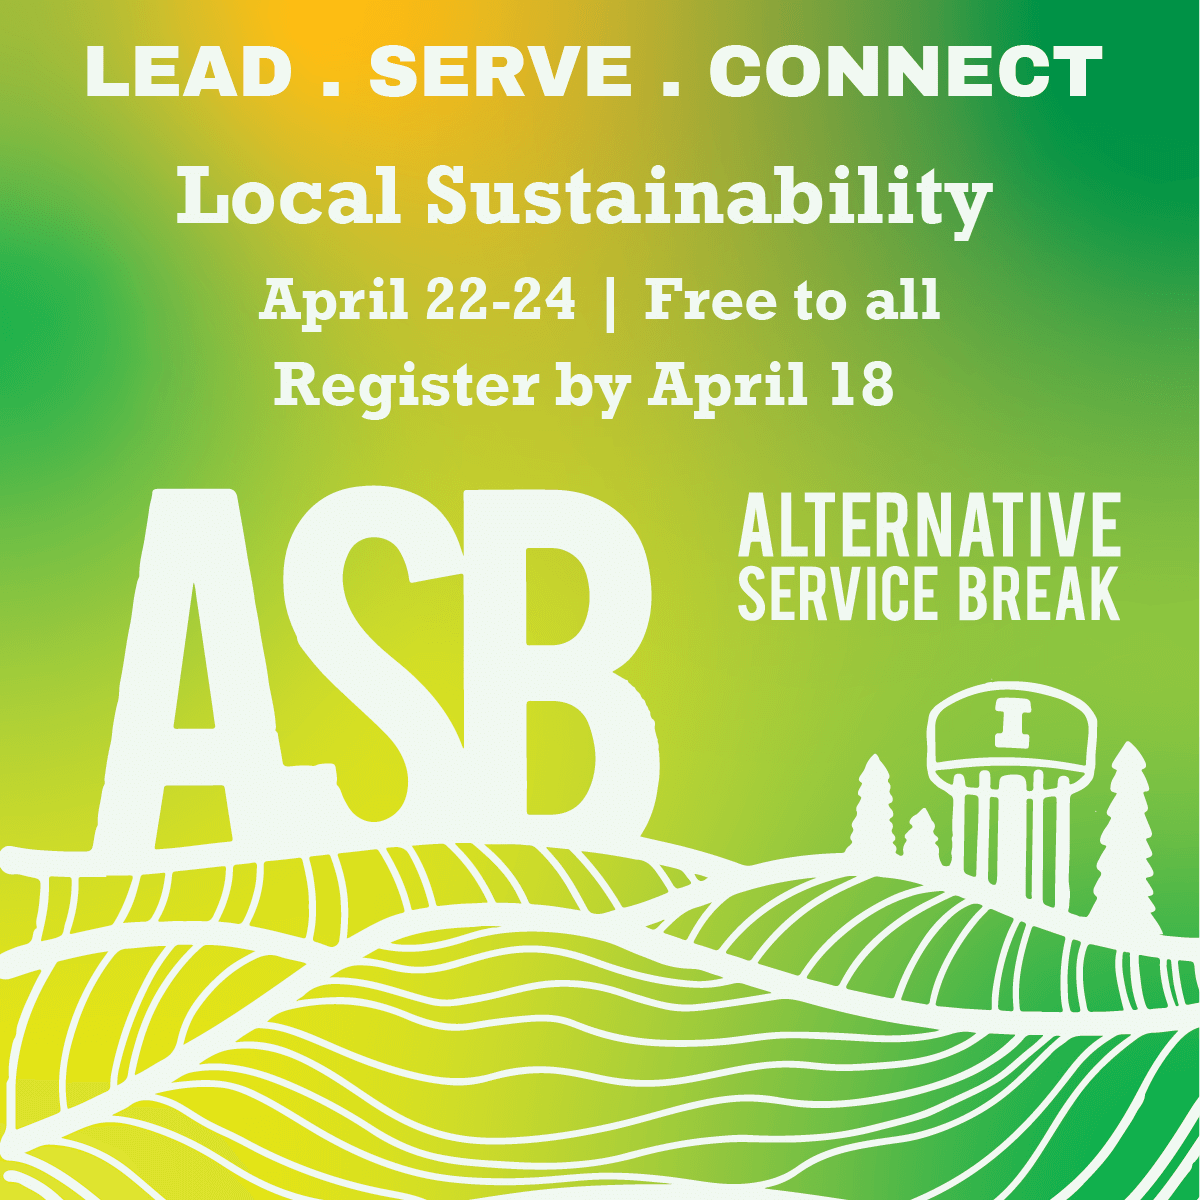 Join ASB on a Local Sustainability weekend trip in April 2022.